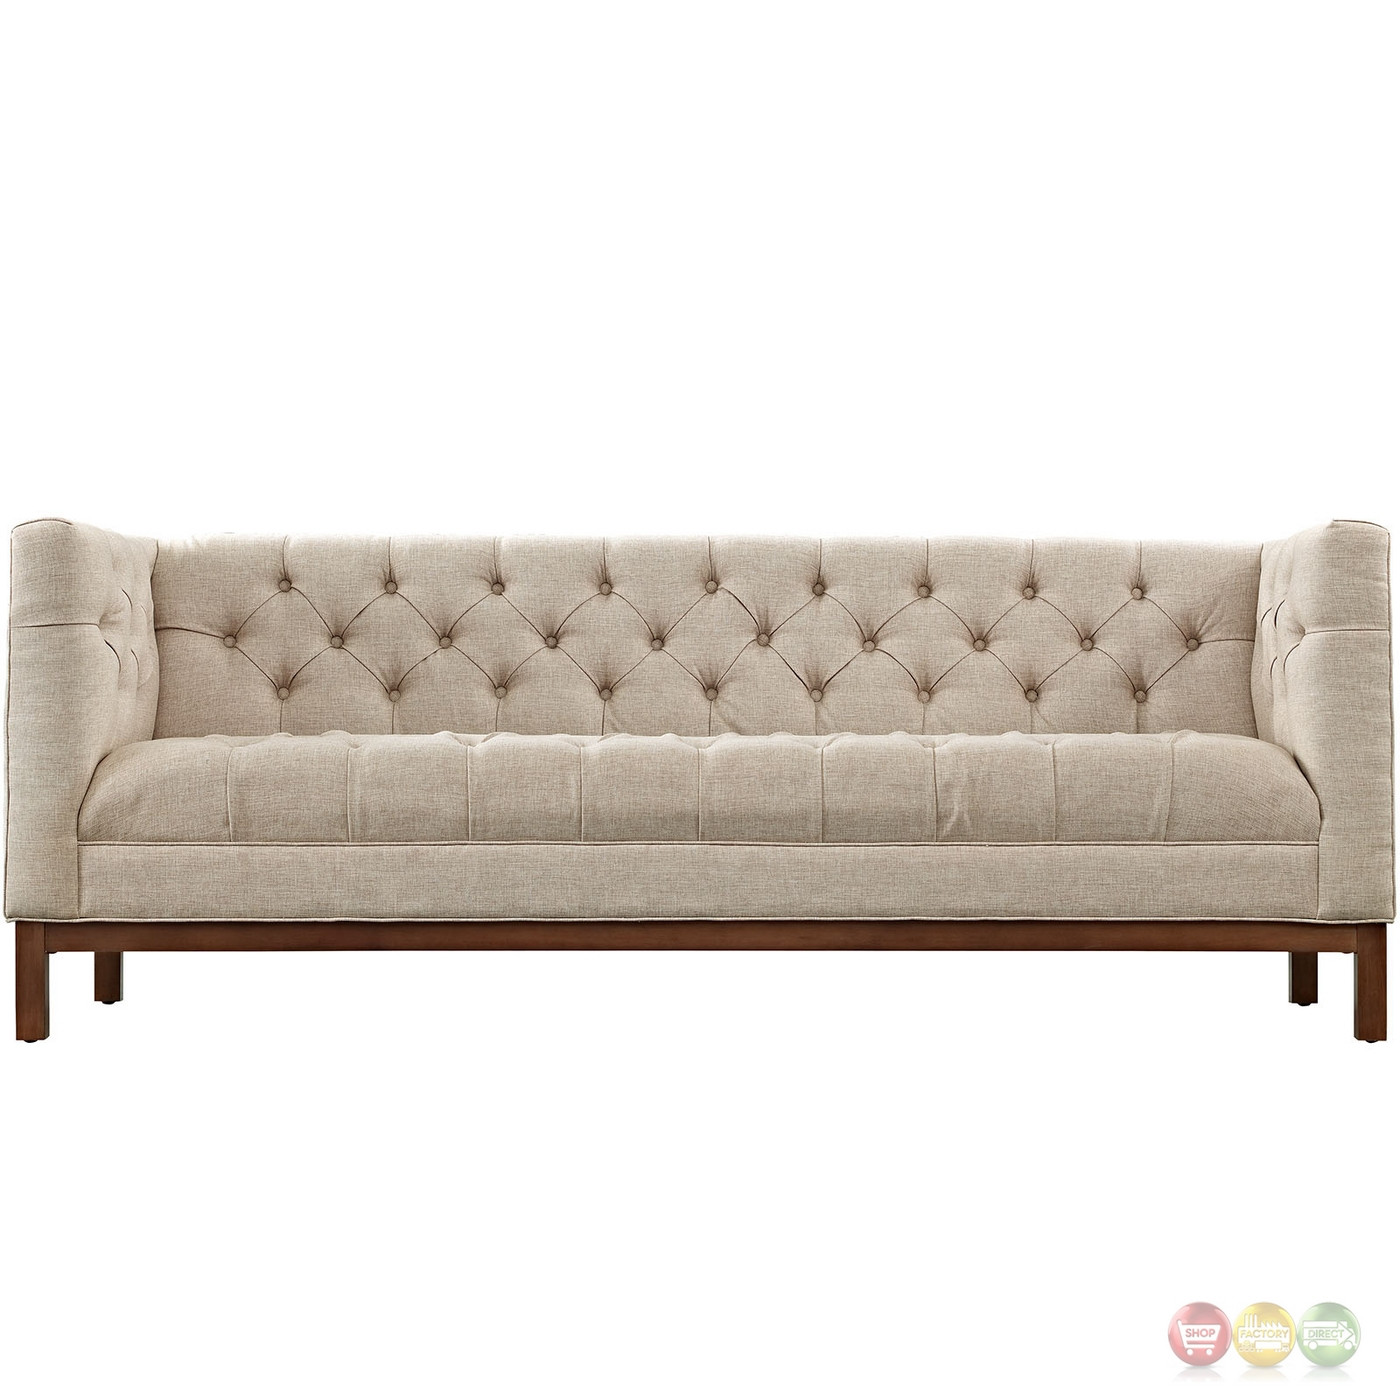 Sofa Beige
 Panache Vintage Square Button tufted Upholstered Sofa Beige